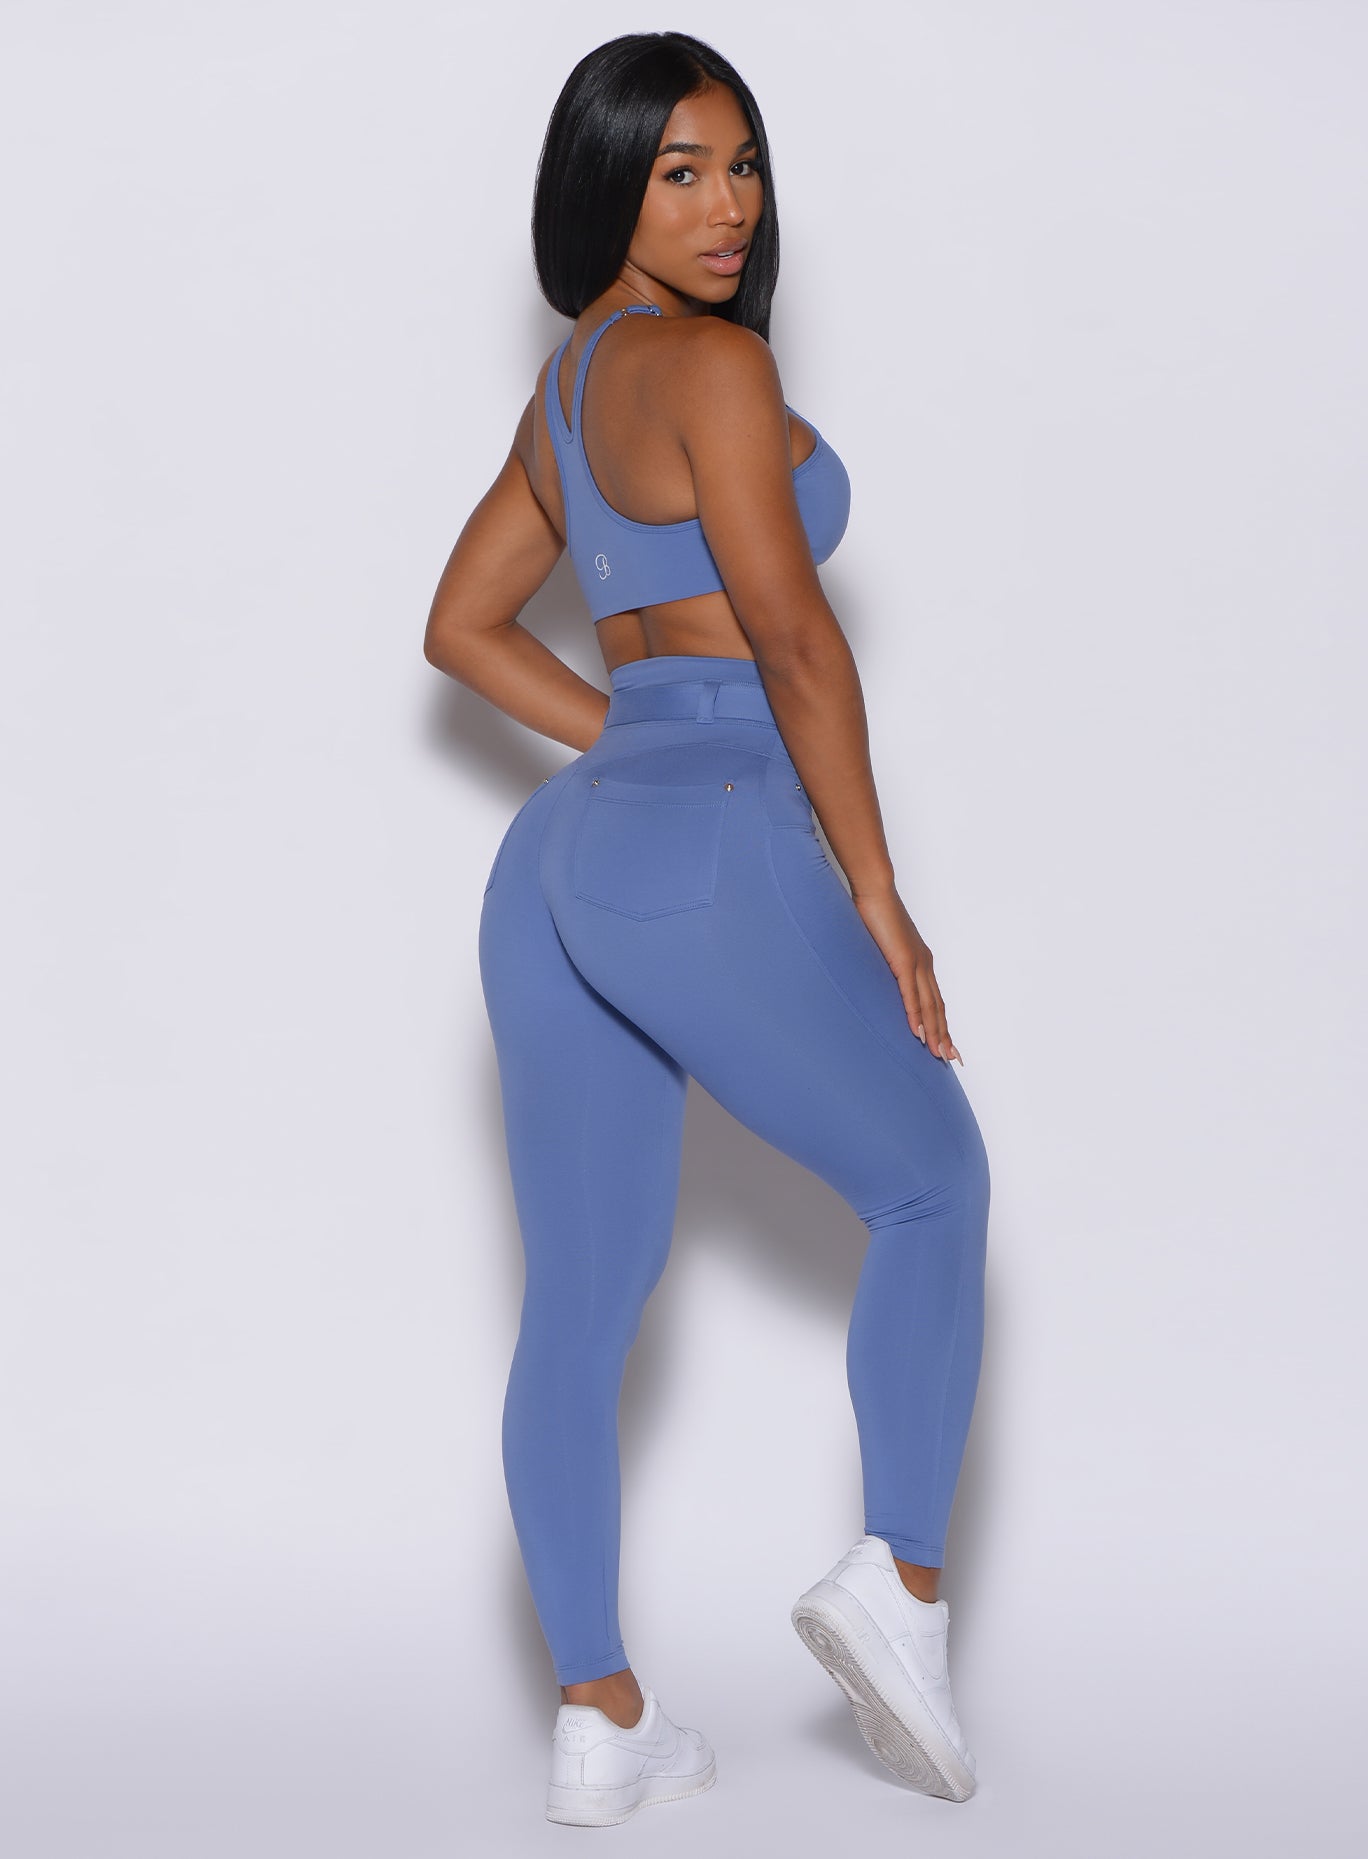 Right side  profile view of a model wearing our peach bottoms leggings in denim blue color along with the matching bra